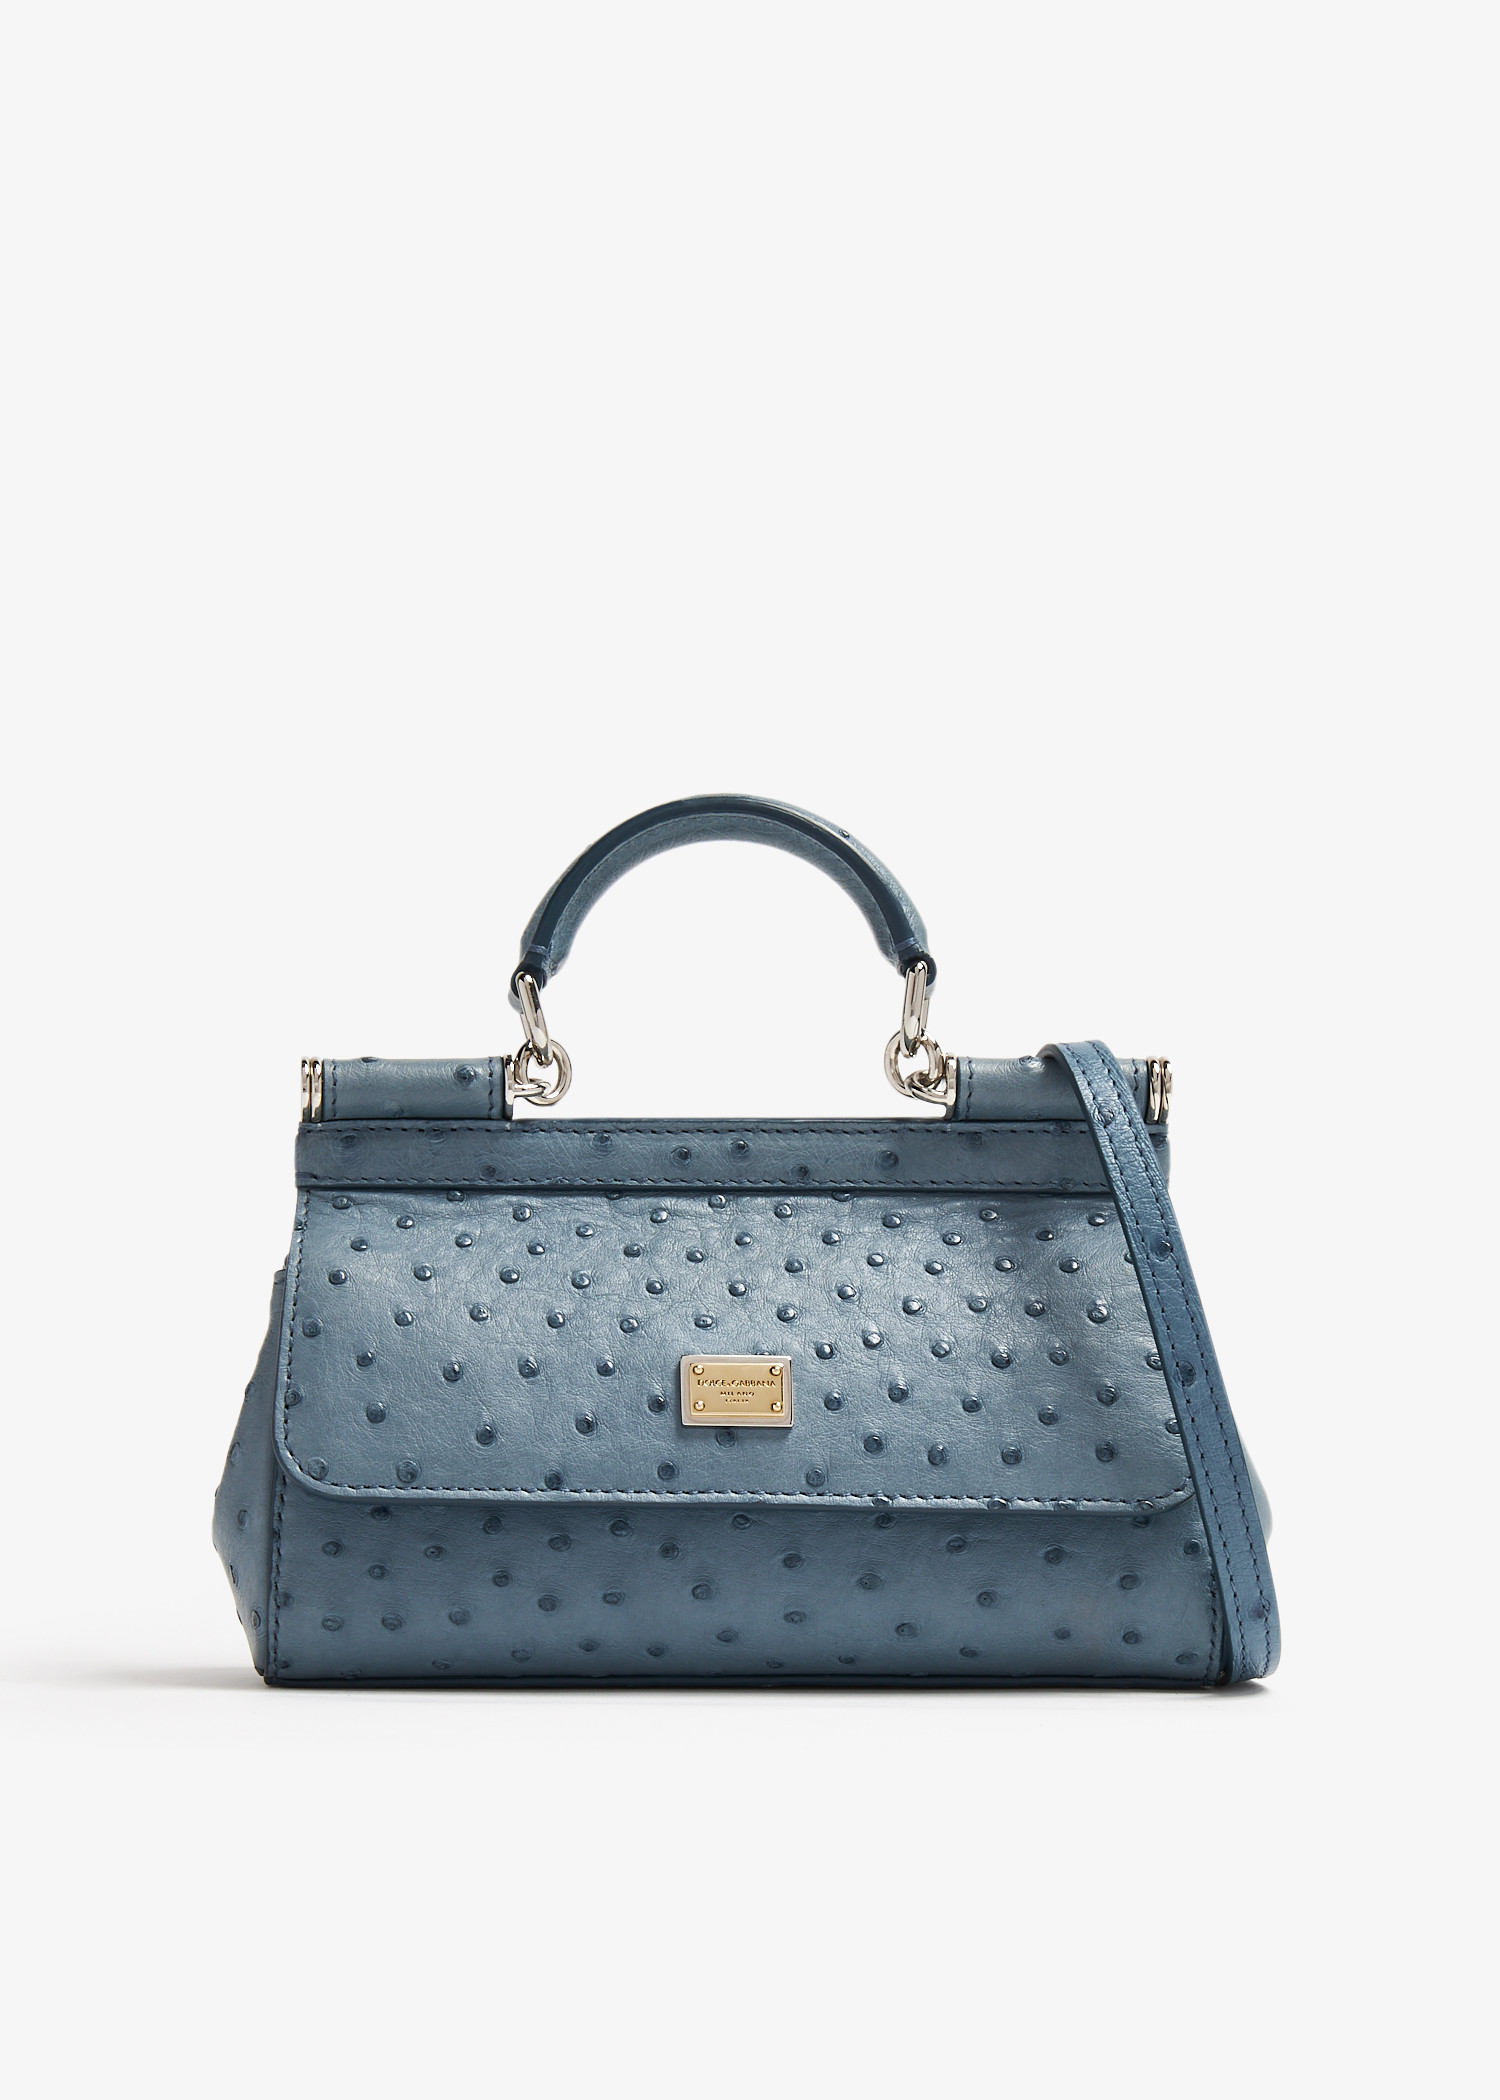 Dolce&Gabbana Small Sicily ostrich leather bag for Women - Blue in 